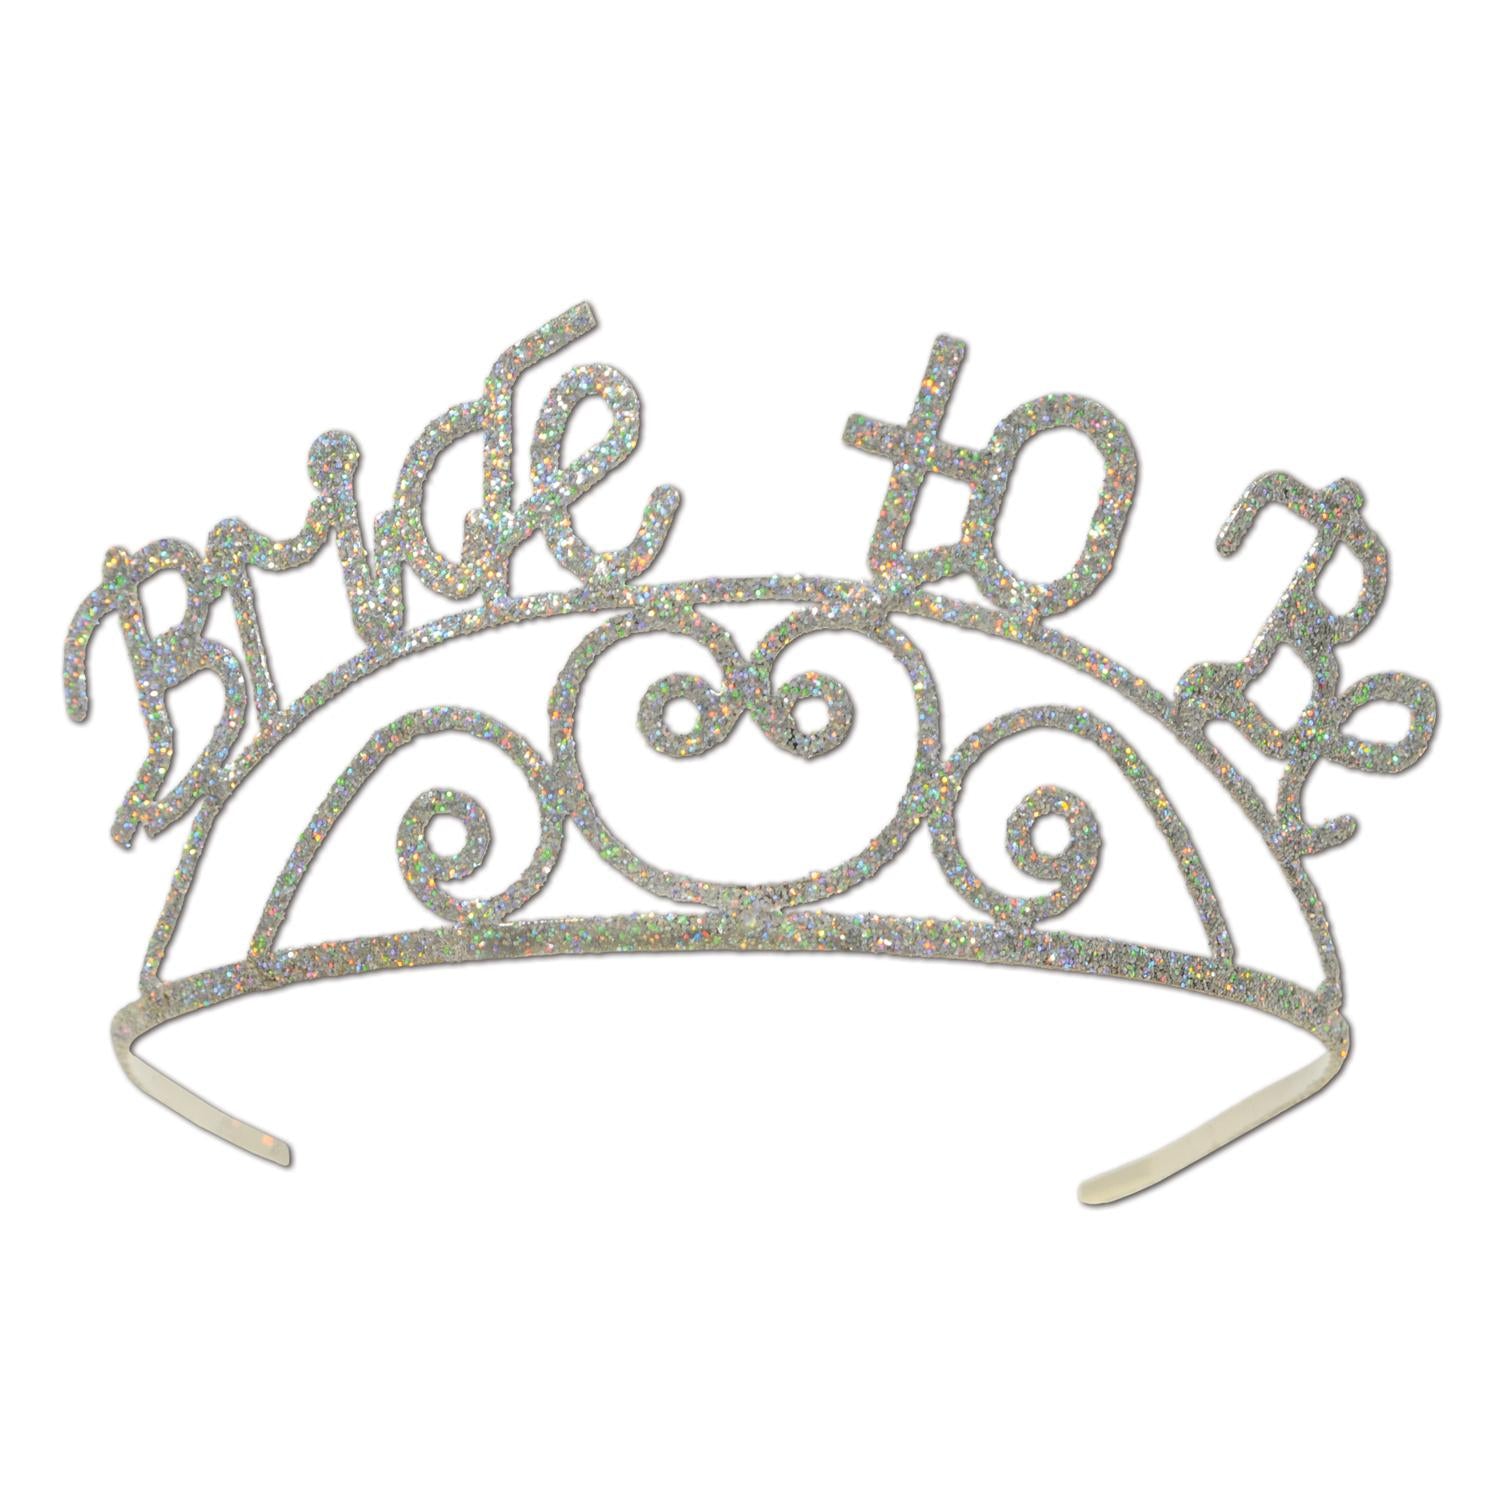 Beistle Bachelorette Party Glittered Metal Bride To Be Tiara